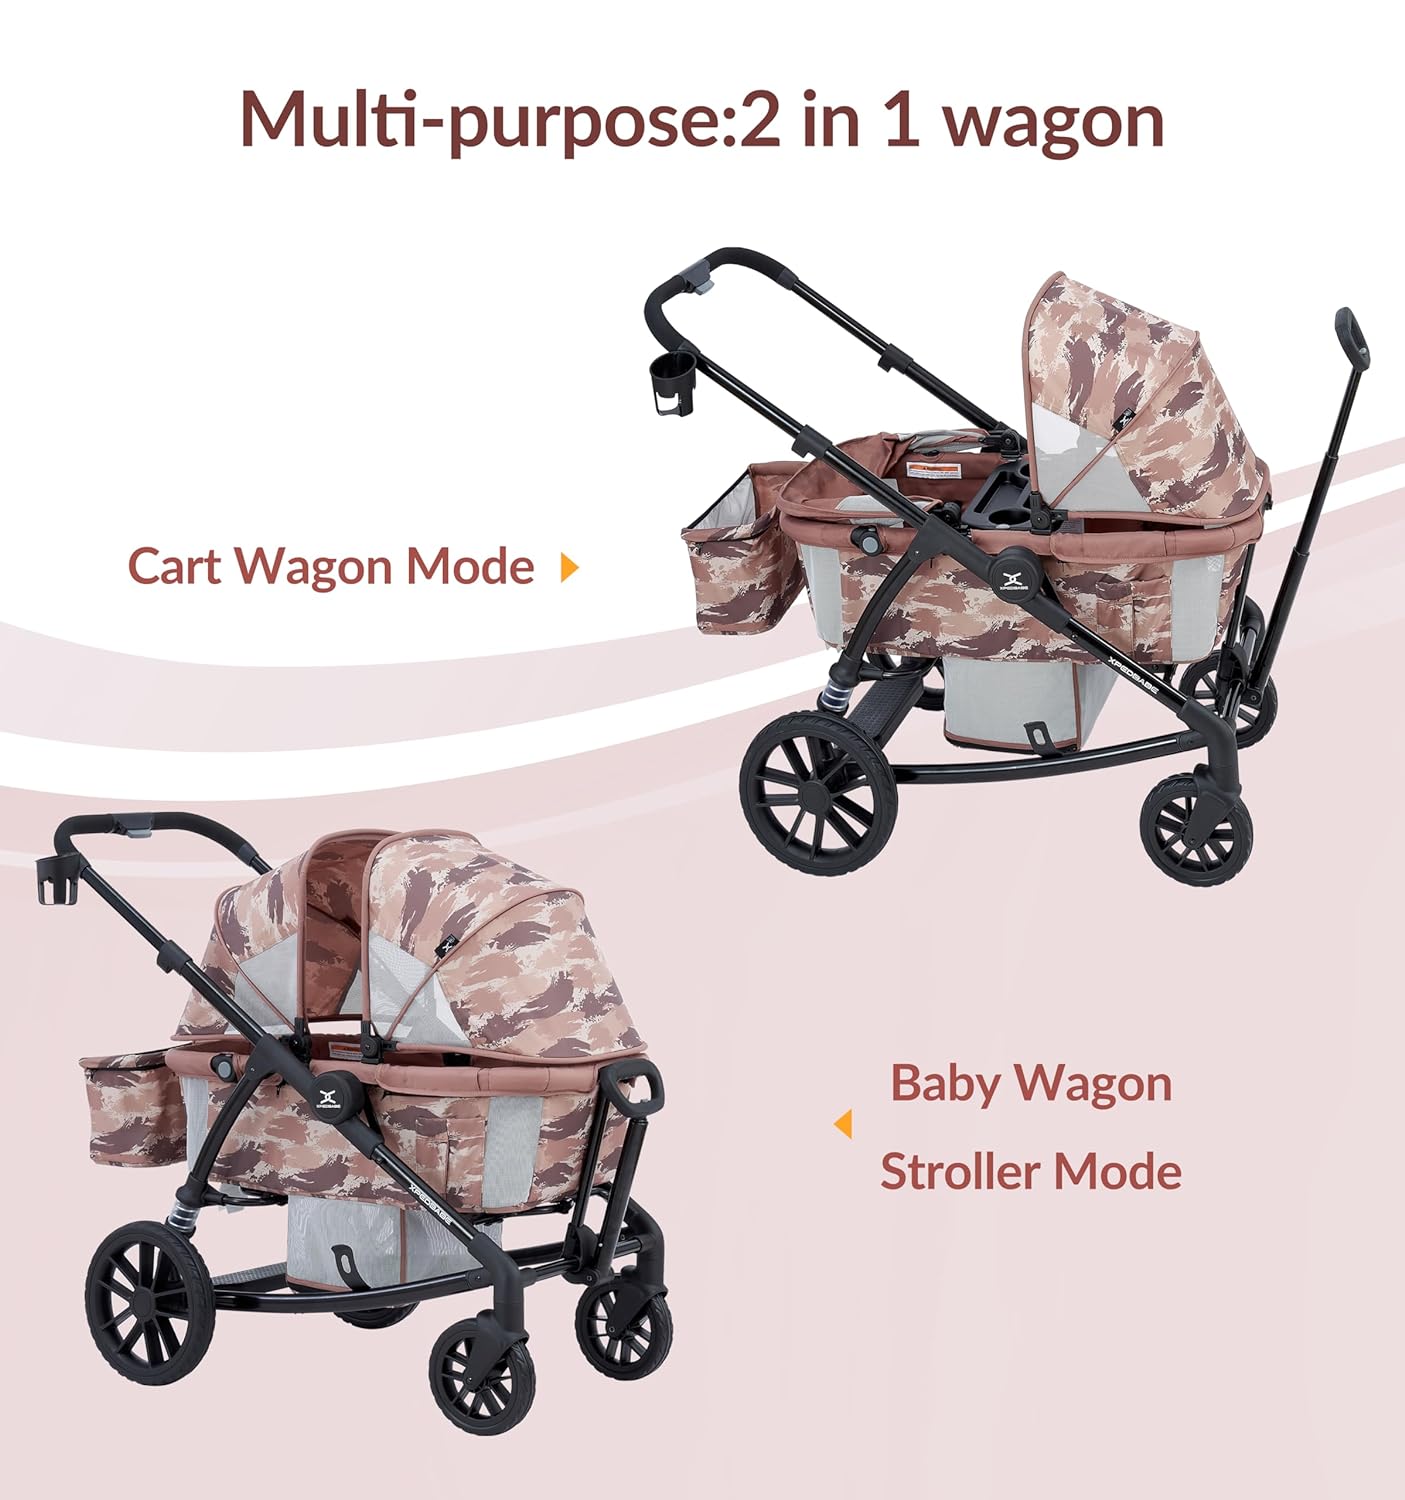 Xped Babe All-Terrain Wagon Stroller for Two Kids, Double Stroller with Push or Pull Handle, Canopy, Storage Basket, Dinner Plate, Oversized Damping Wheels, Mosquito Net and Rain Cover（Green） - Xped Babe All-Terrain Wagon Stroller Review